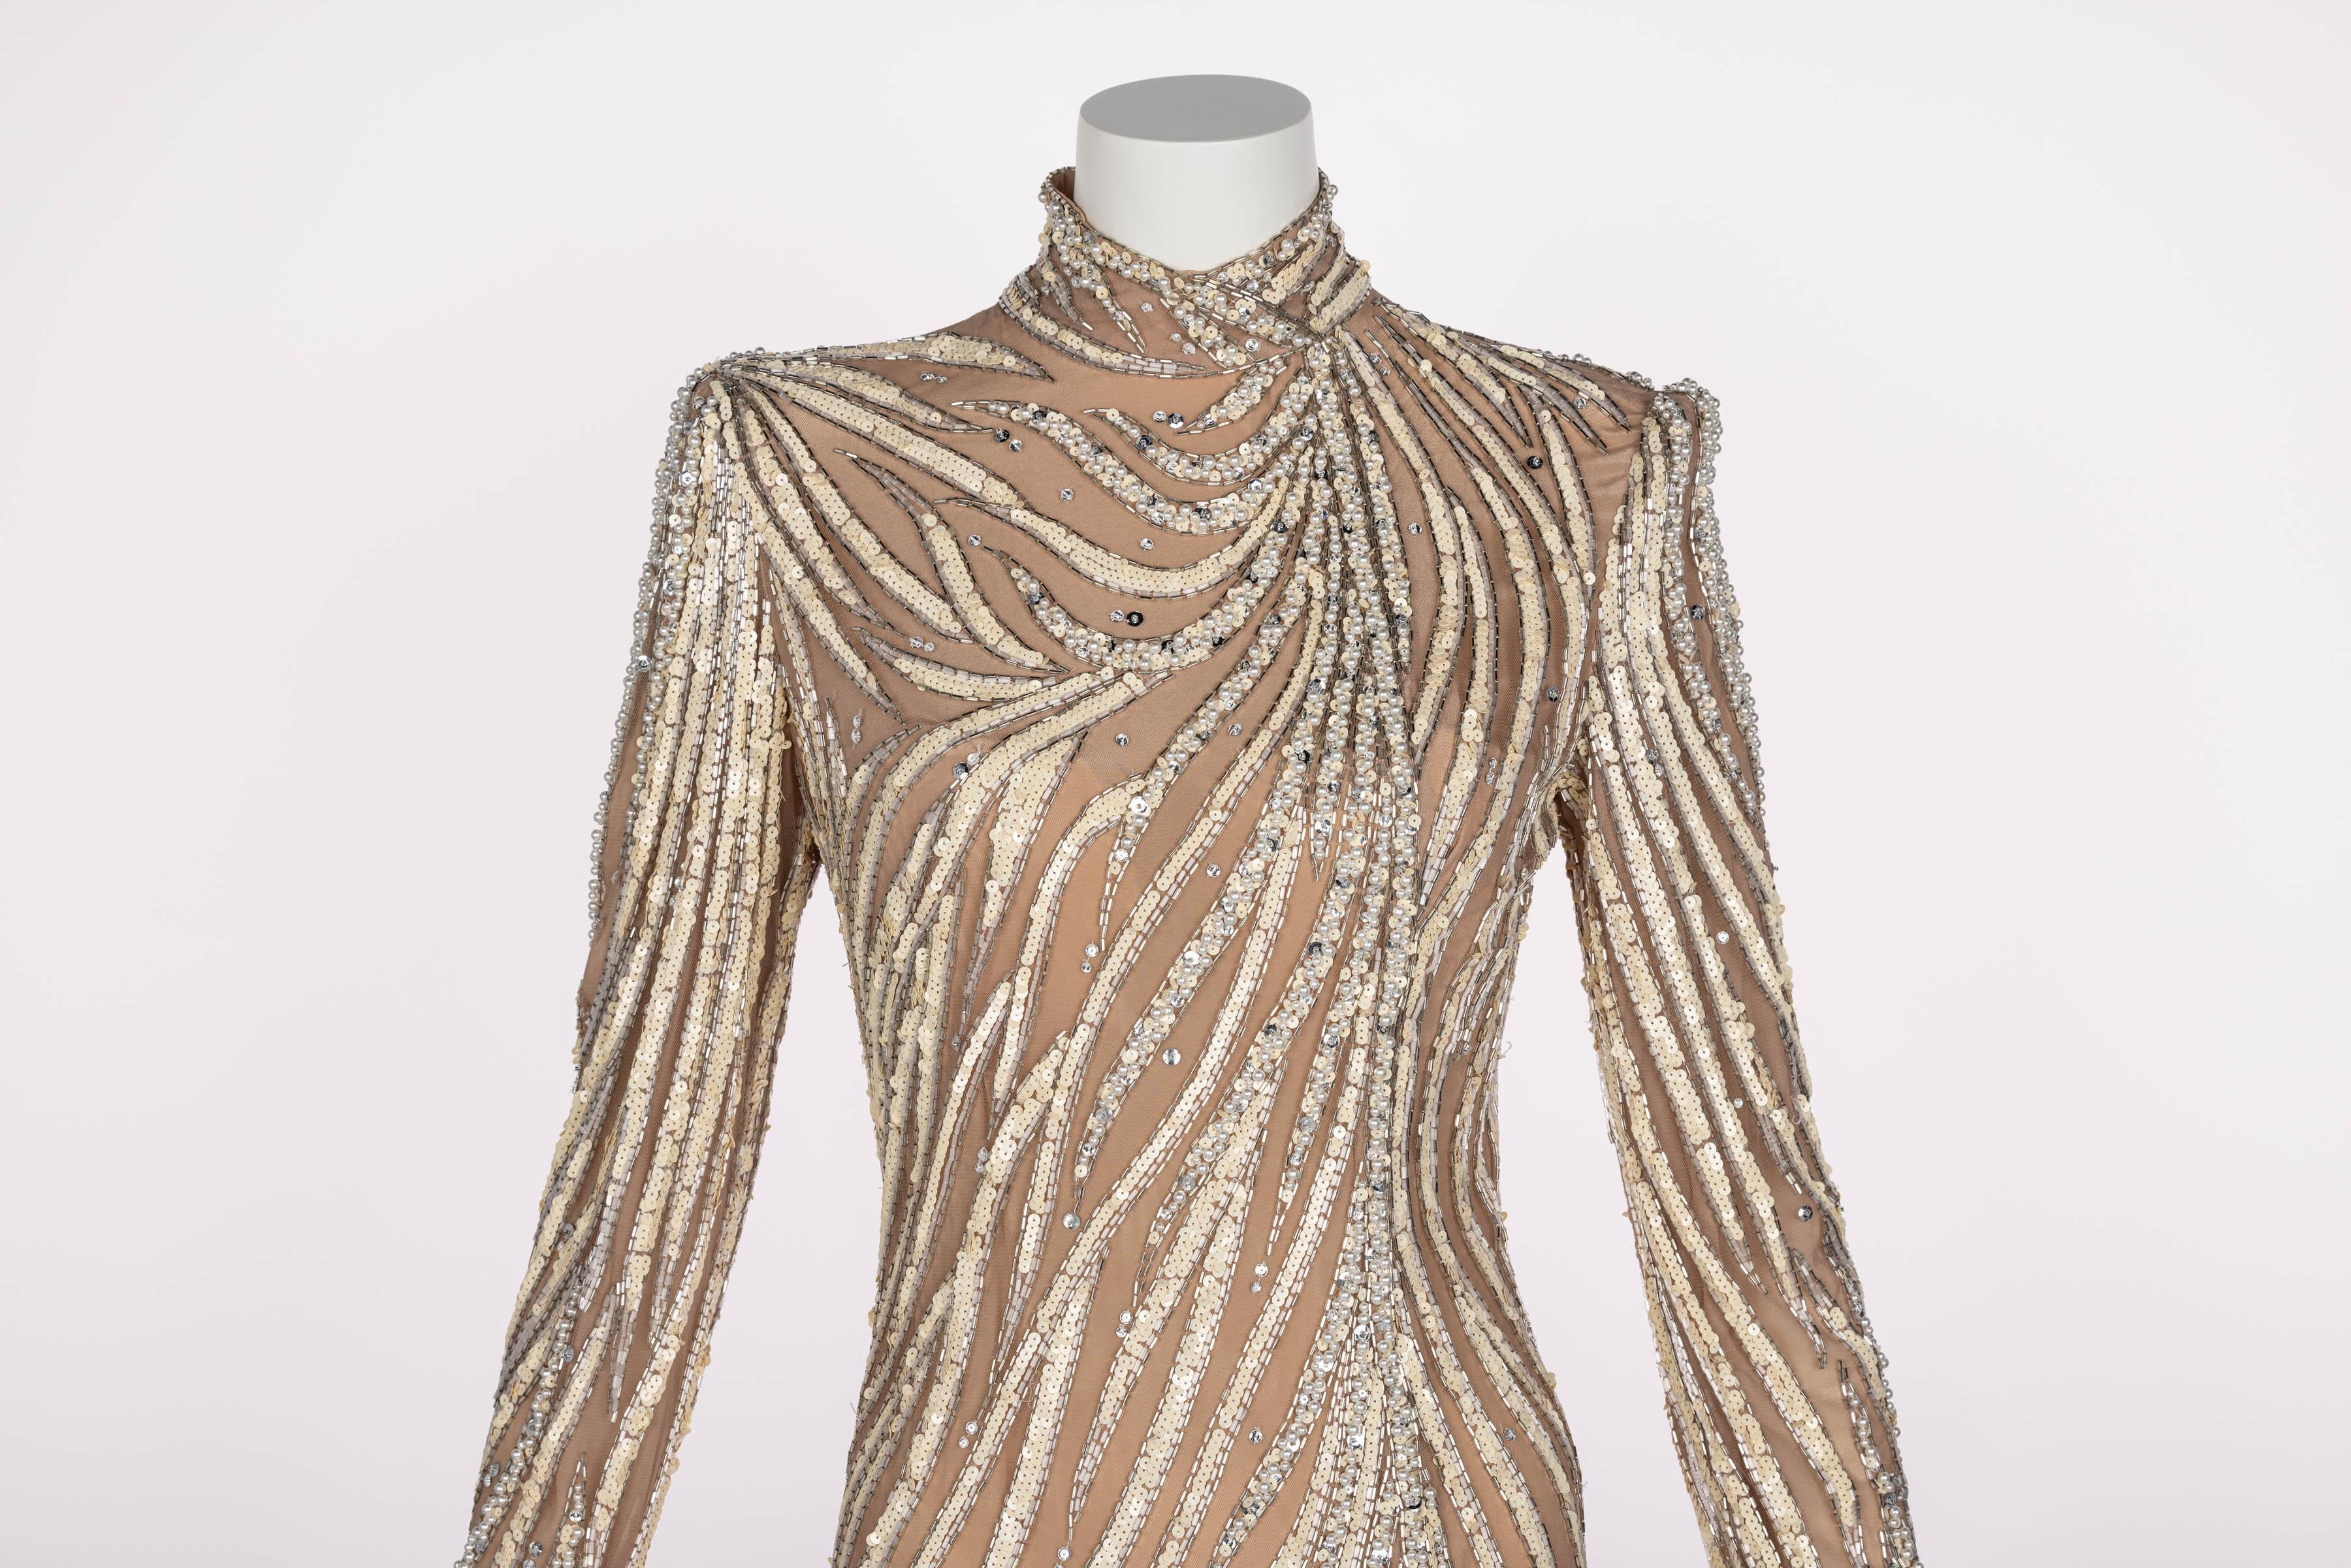 Women's or Men's Bob Mackie Ivory Sequin, Pearls & Nude Stretch Net Thigh High Slit Dress, 1980s For Sale